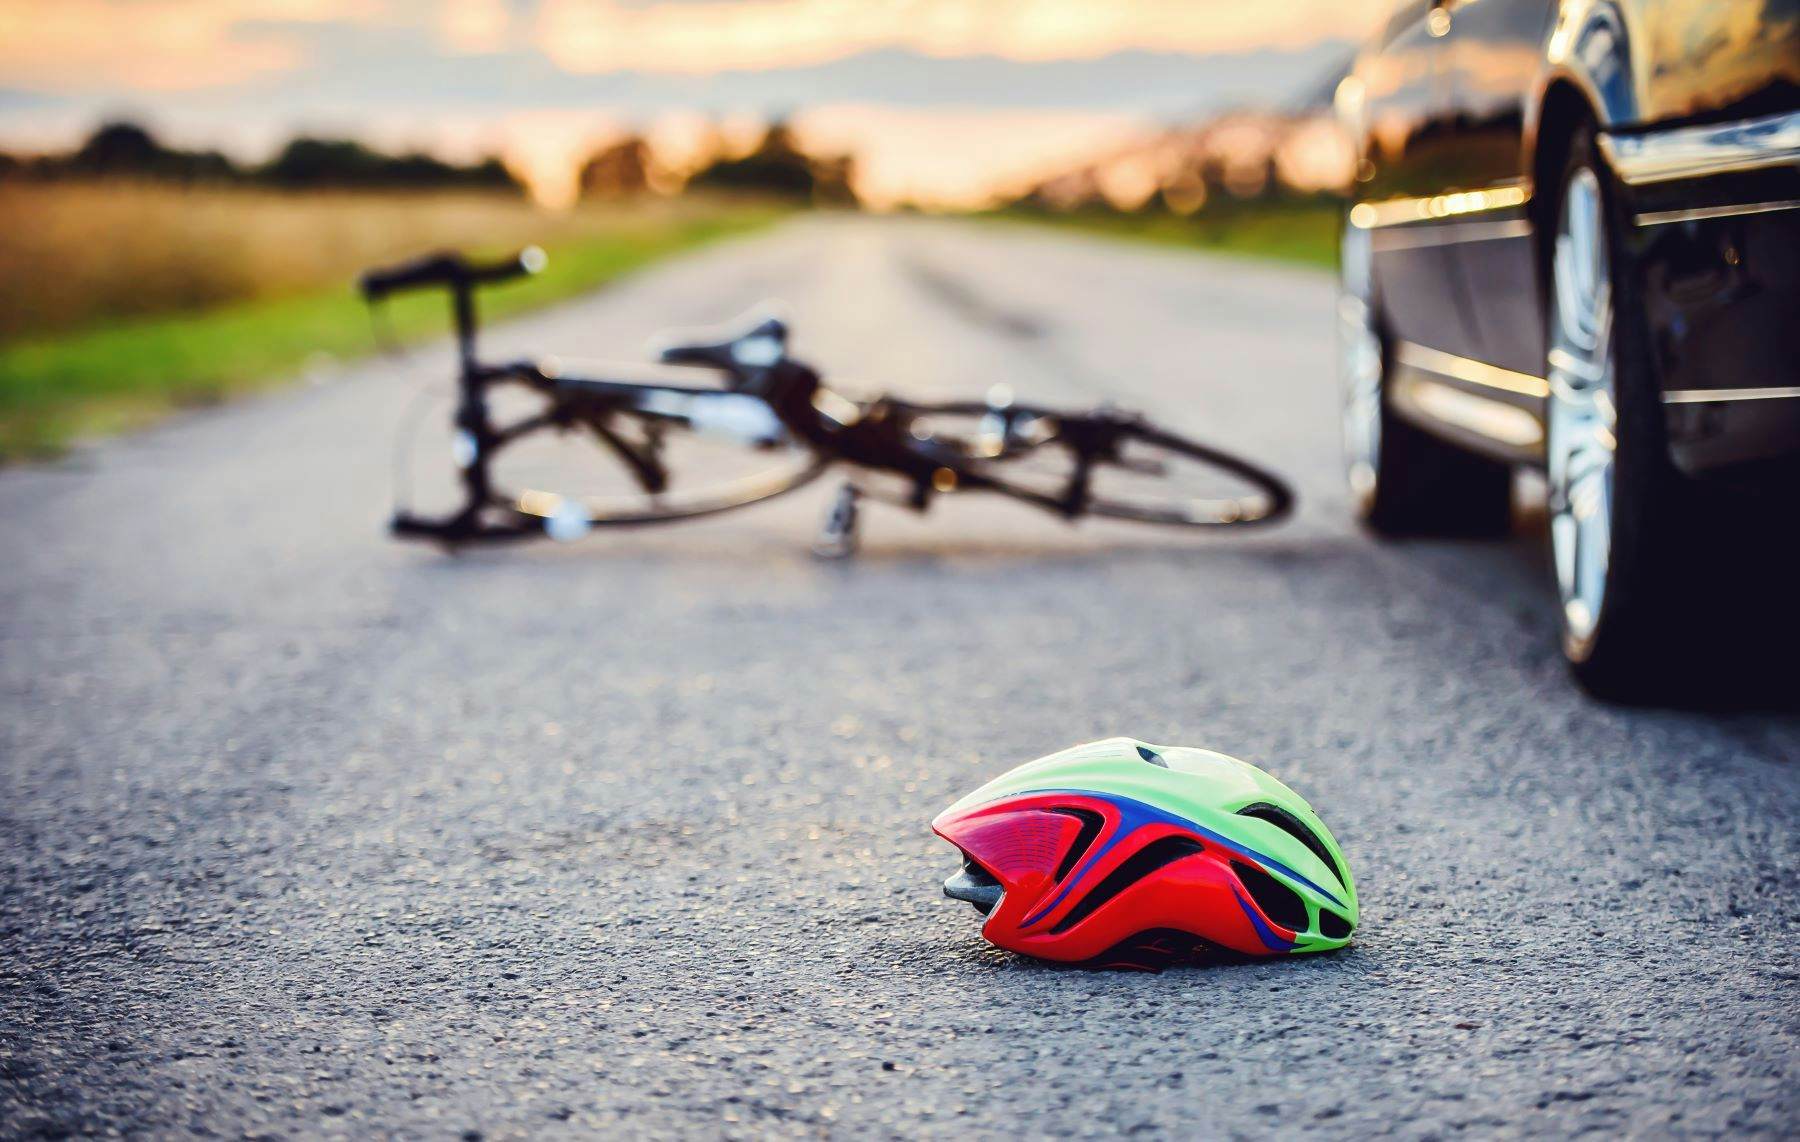 Traffic accident between bicycle and a car